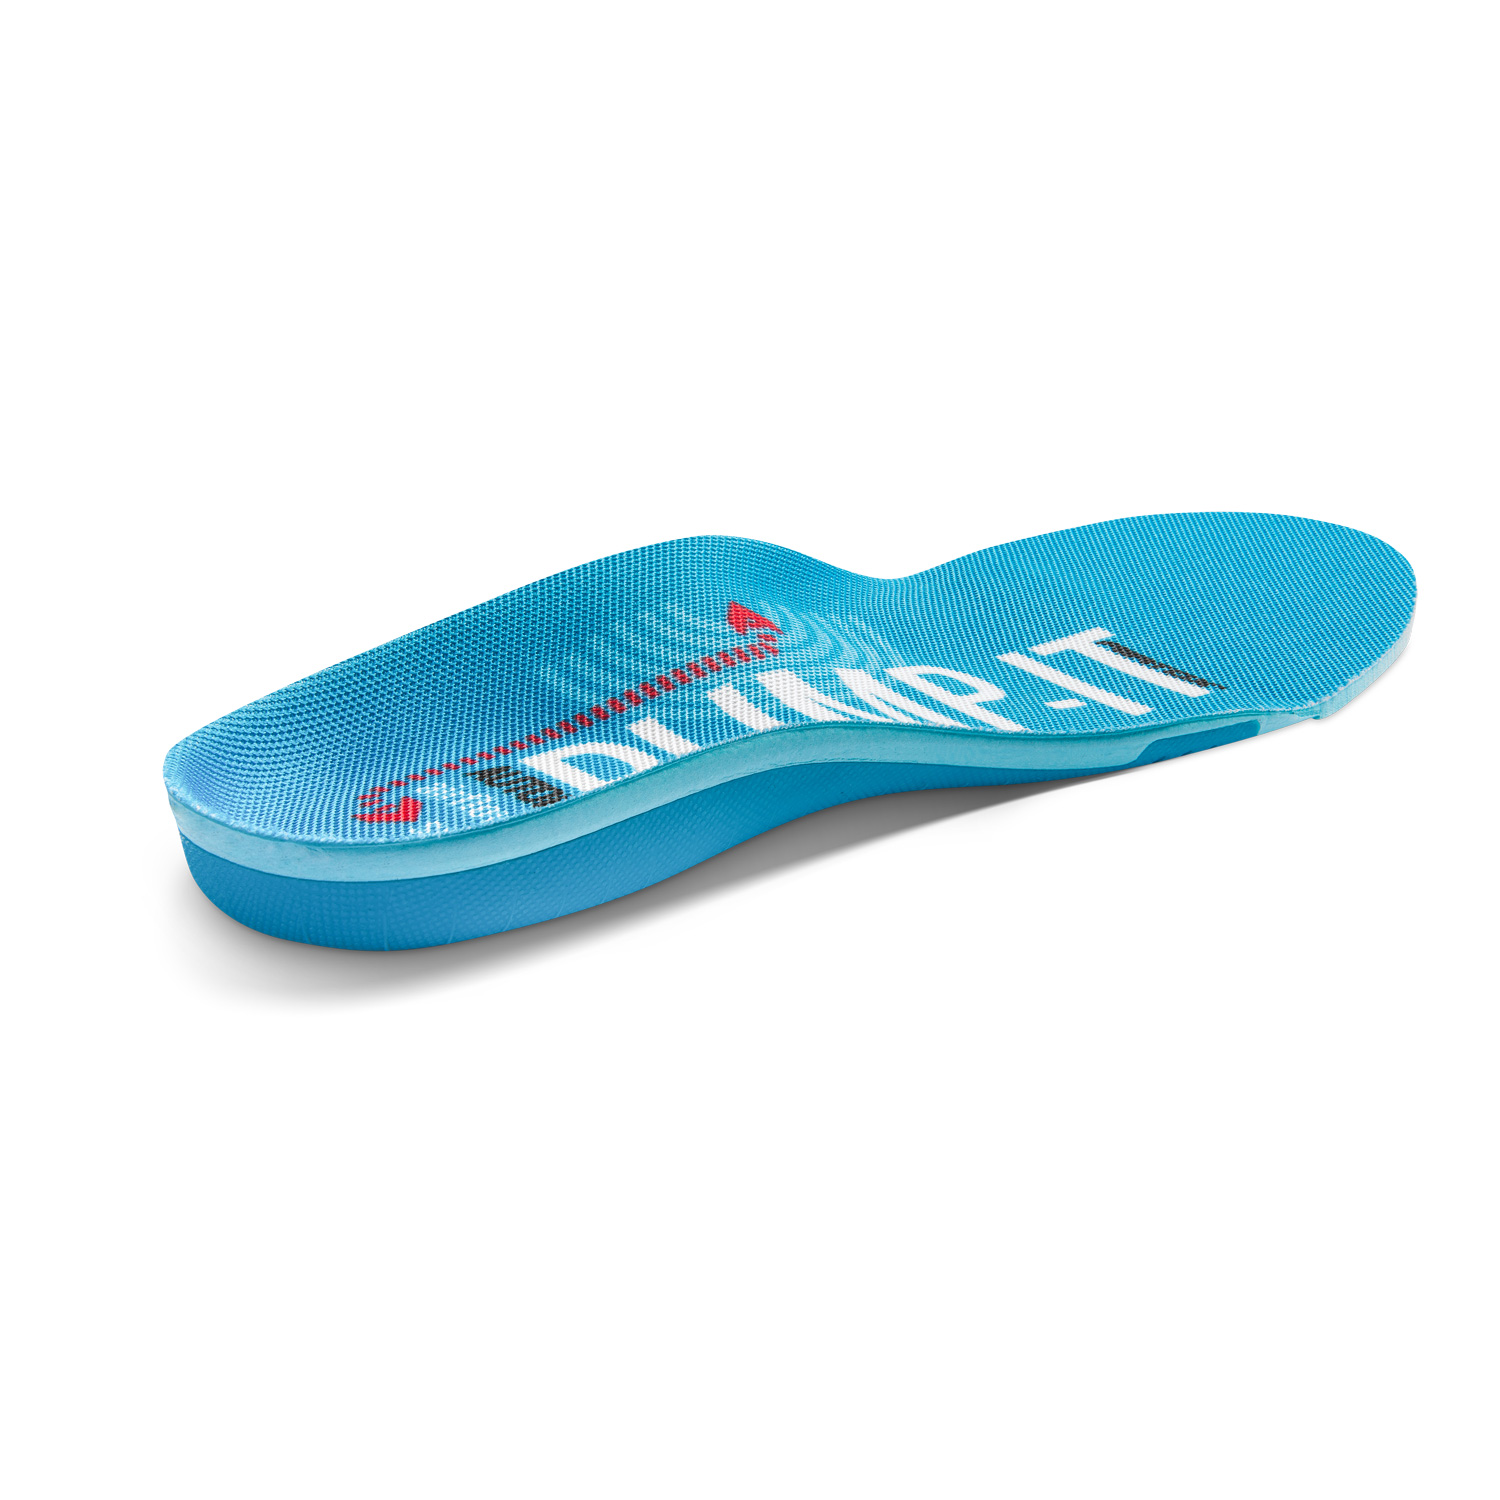 specialized insoles